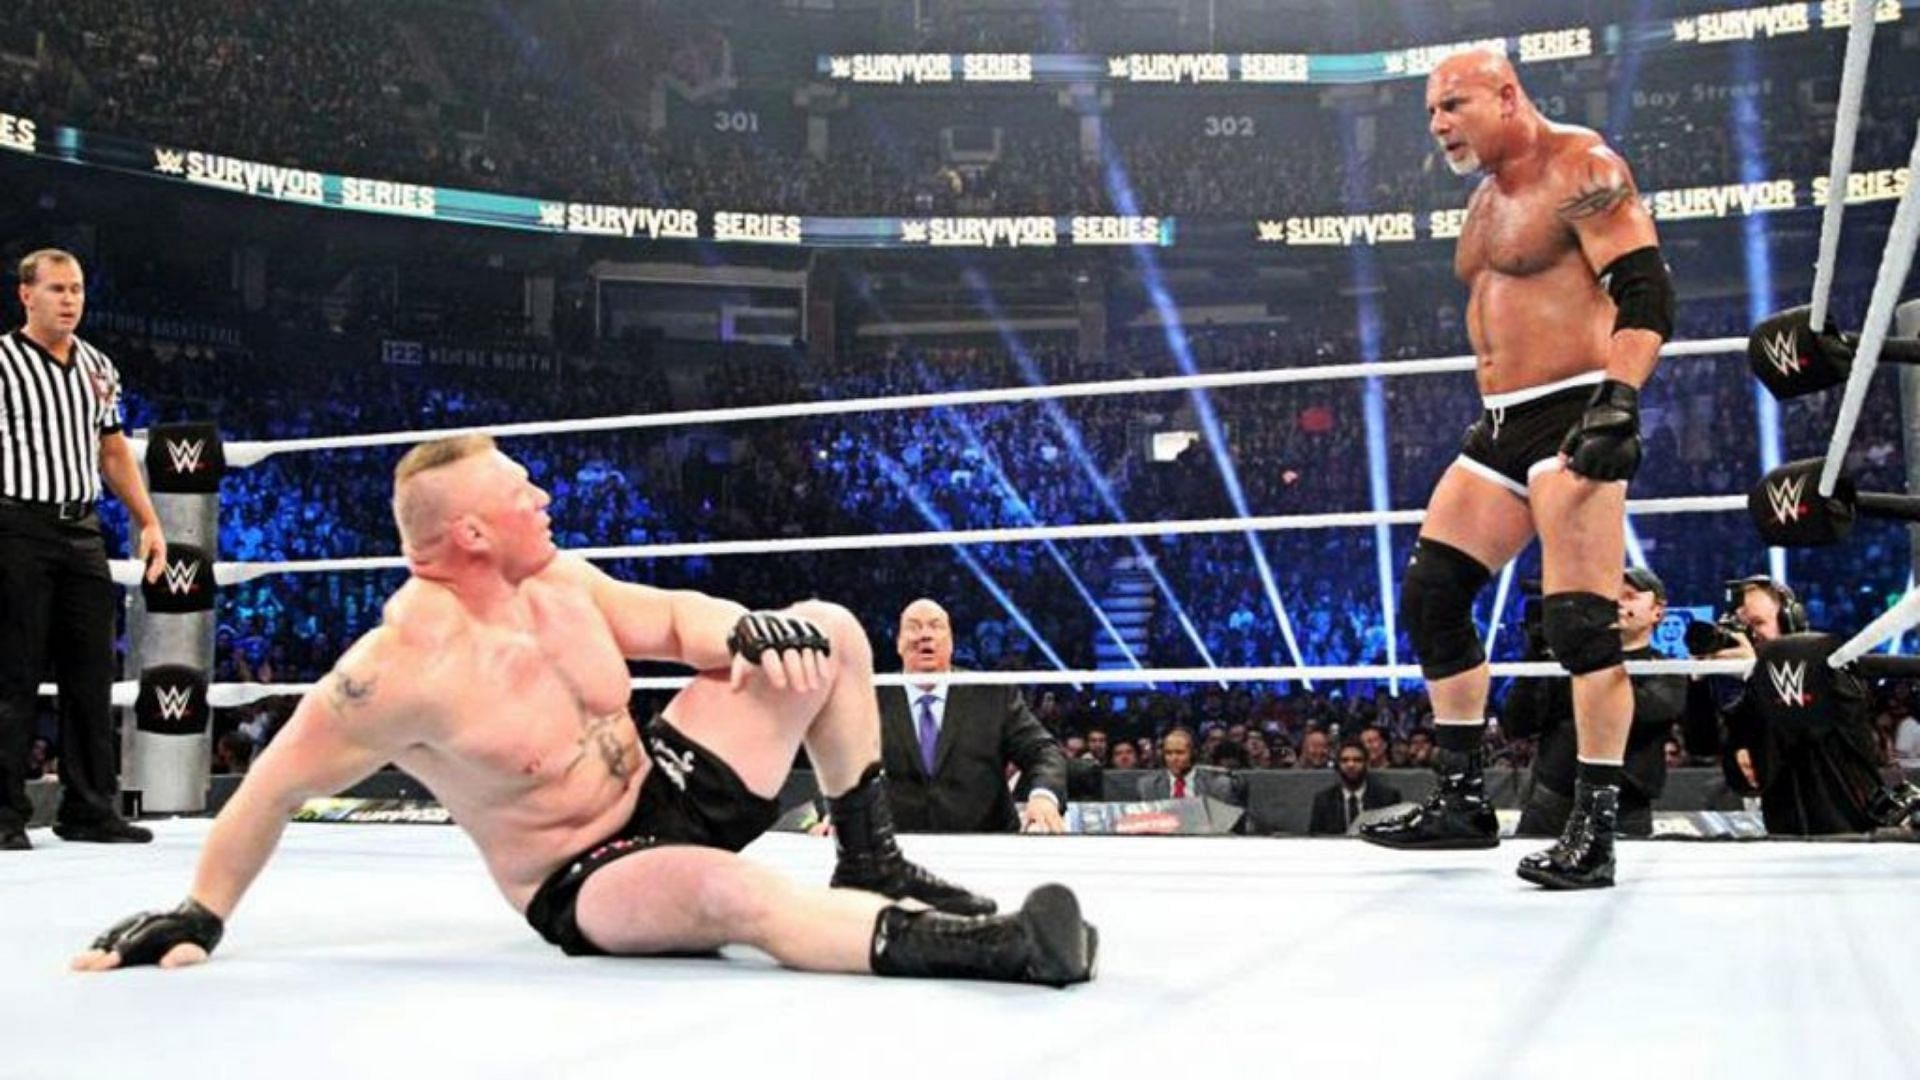 Brock Lesnar has shared the ring with Goldberg on a few occasions